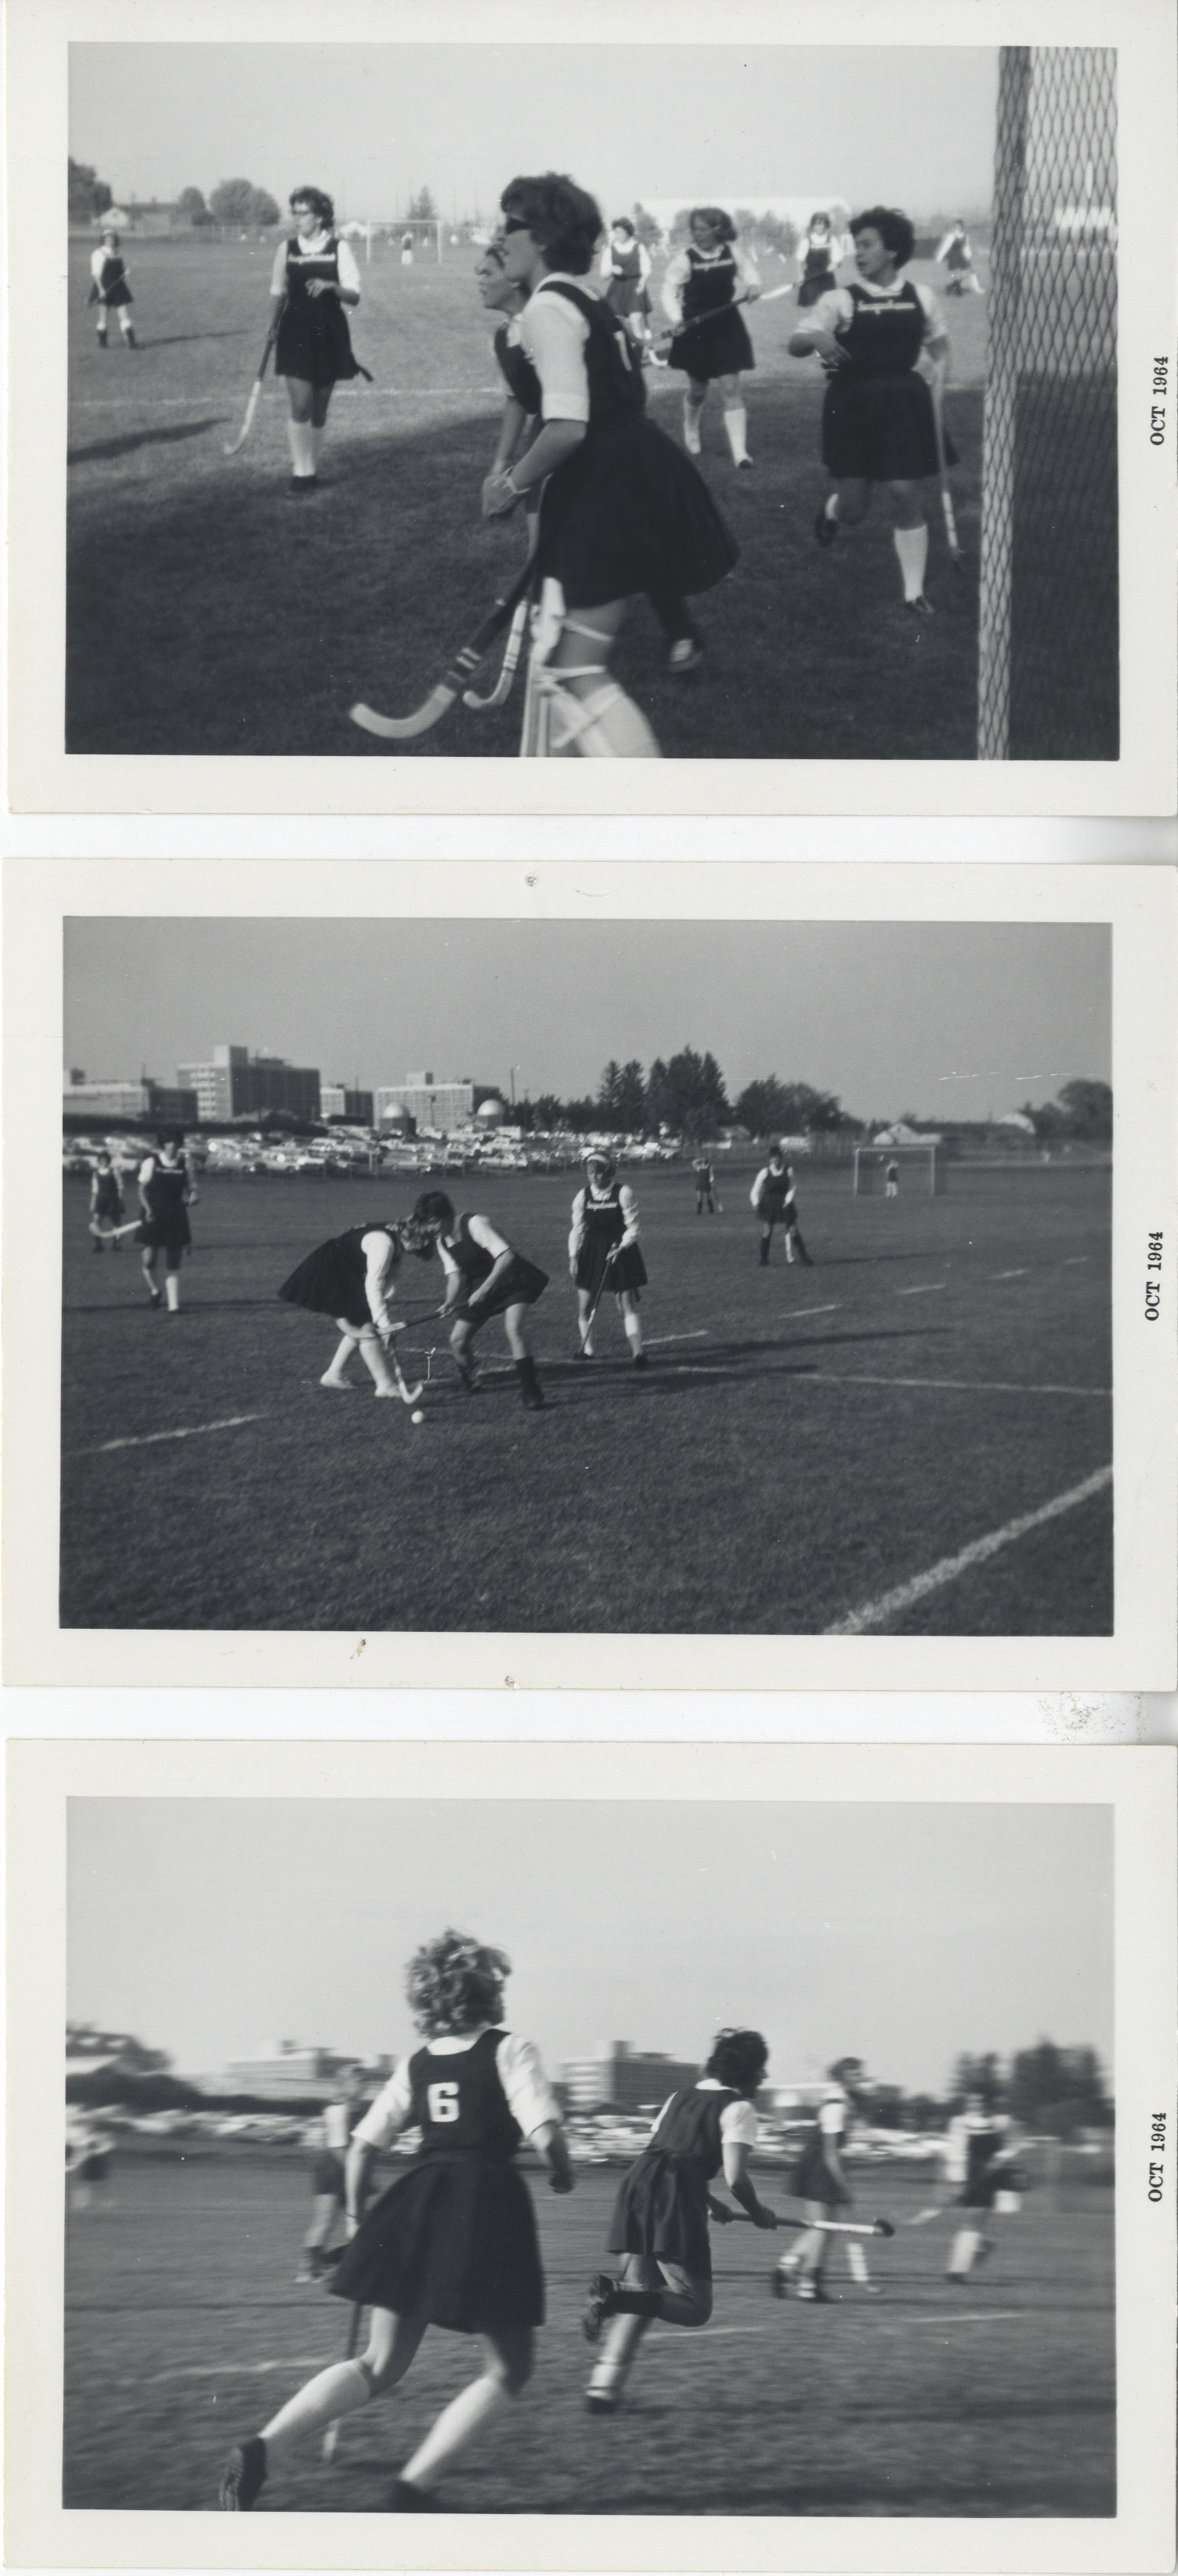 Three black and white photographs of the first Penn State women's field hockey team on the field, by Penn State Archives